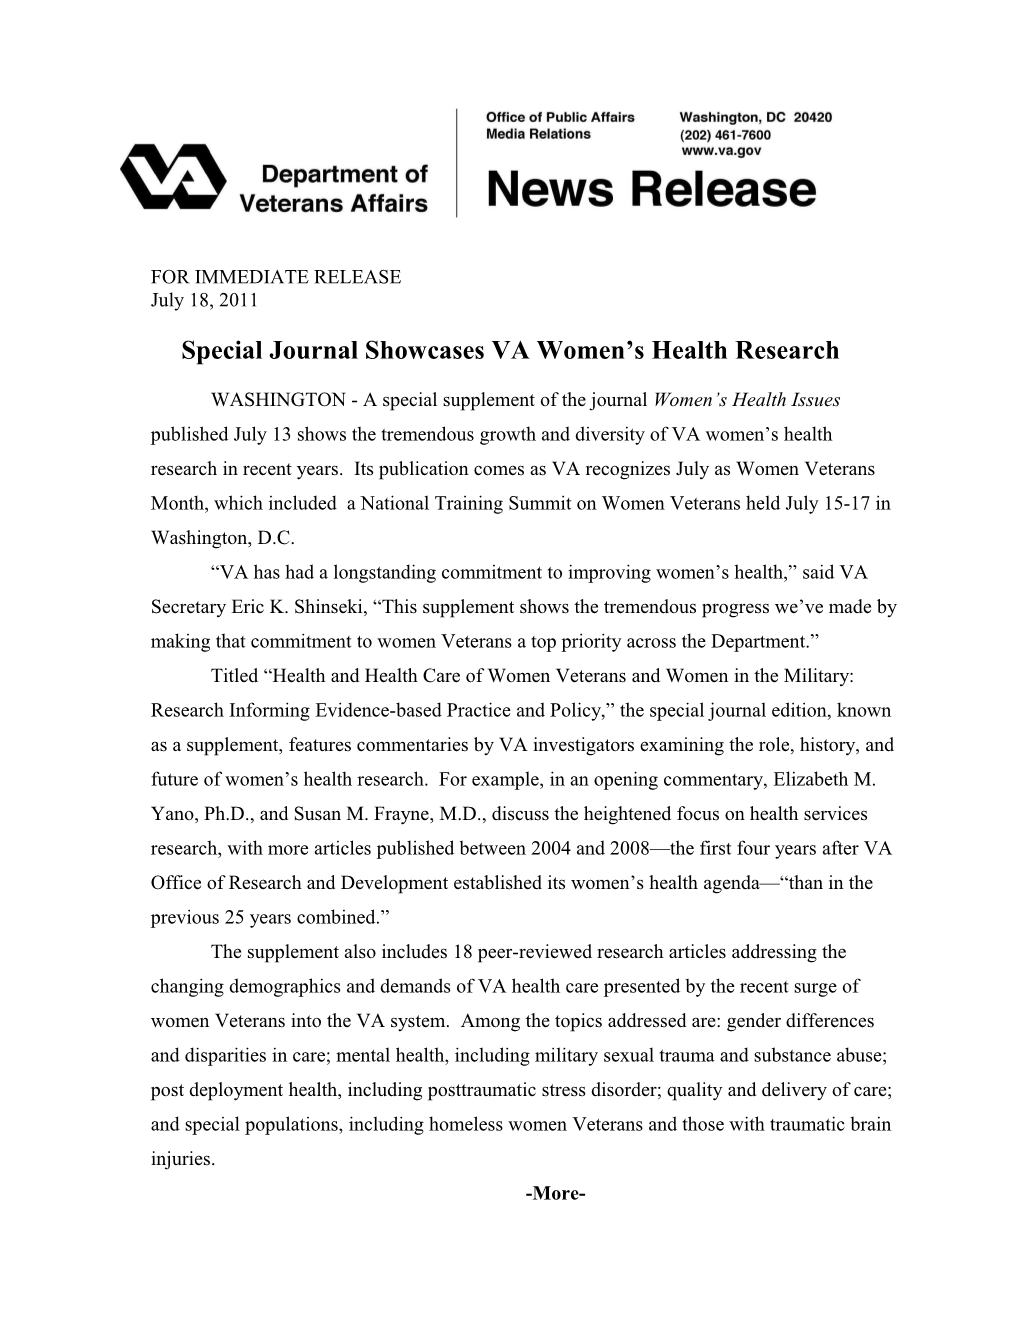 Special Journal Showcases VA Women S Health Research